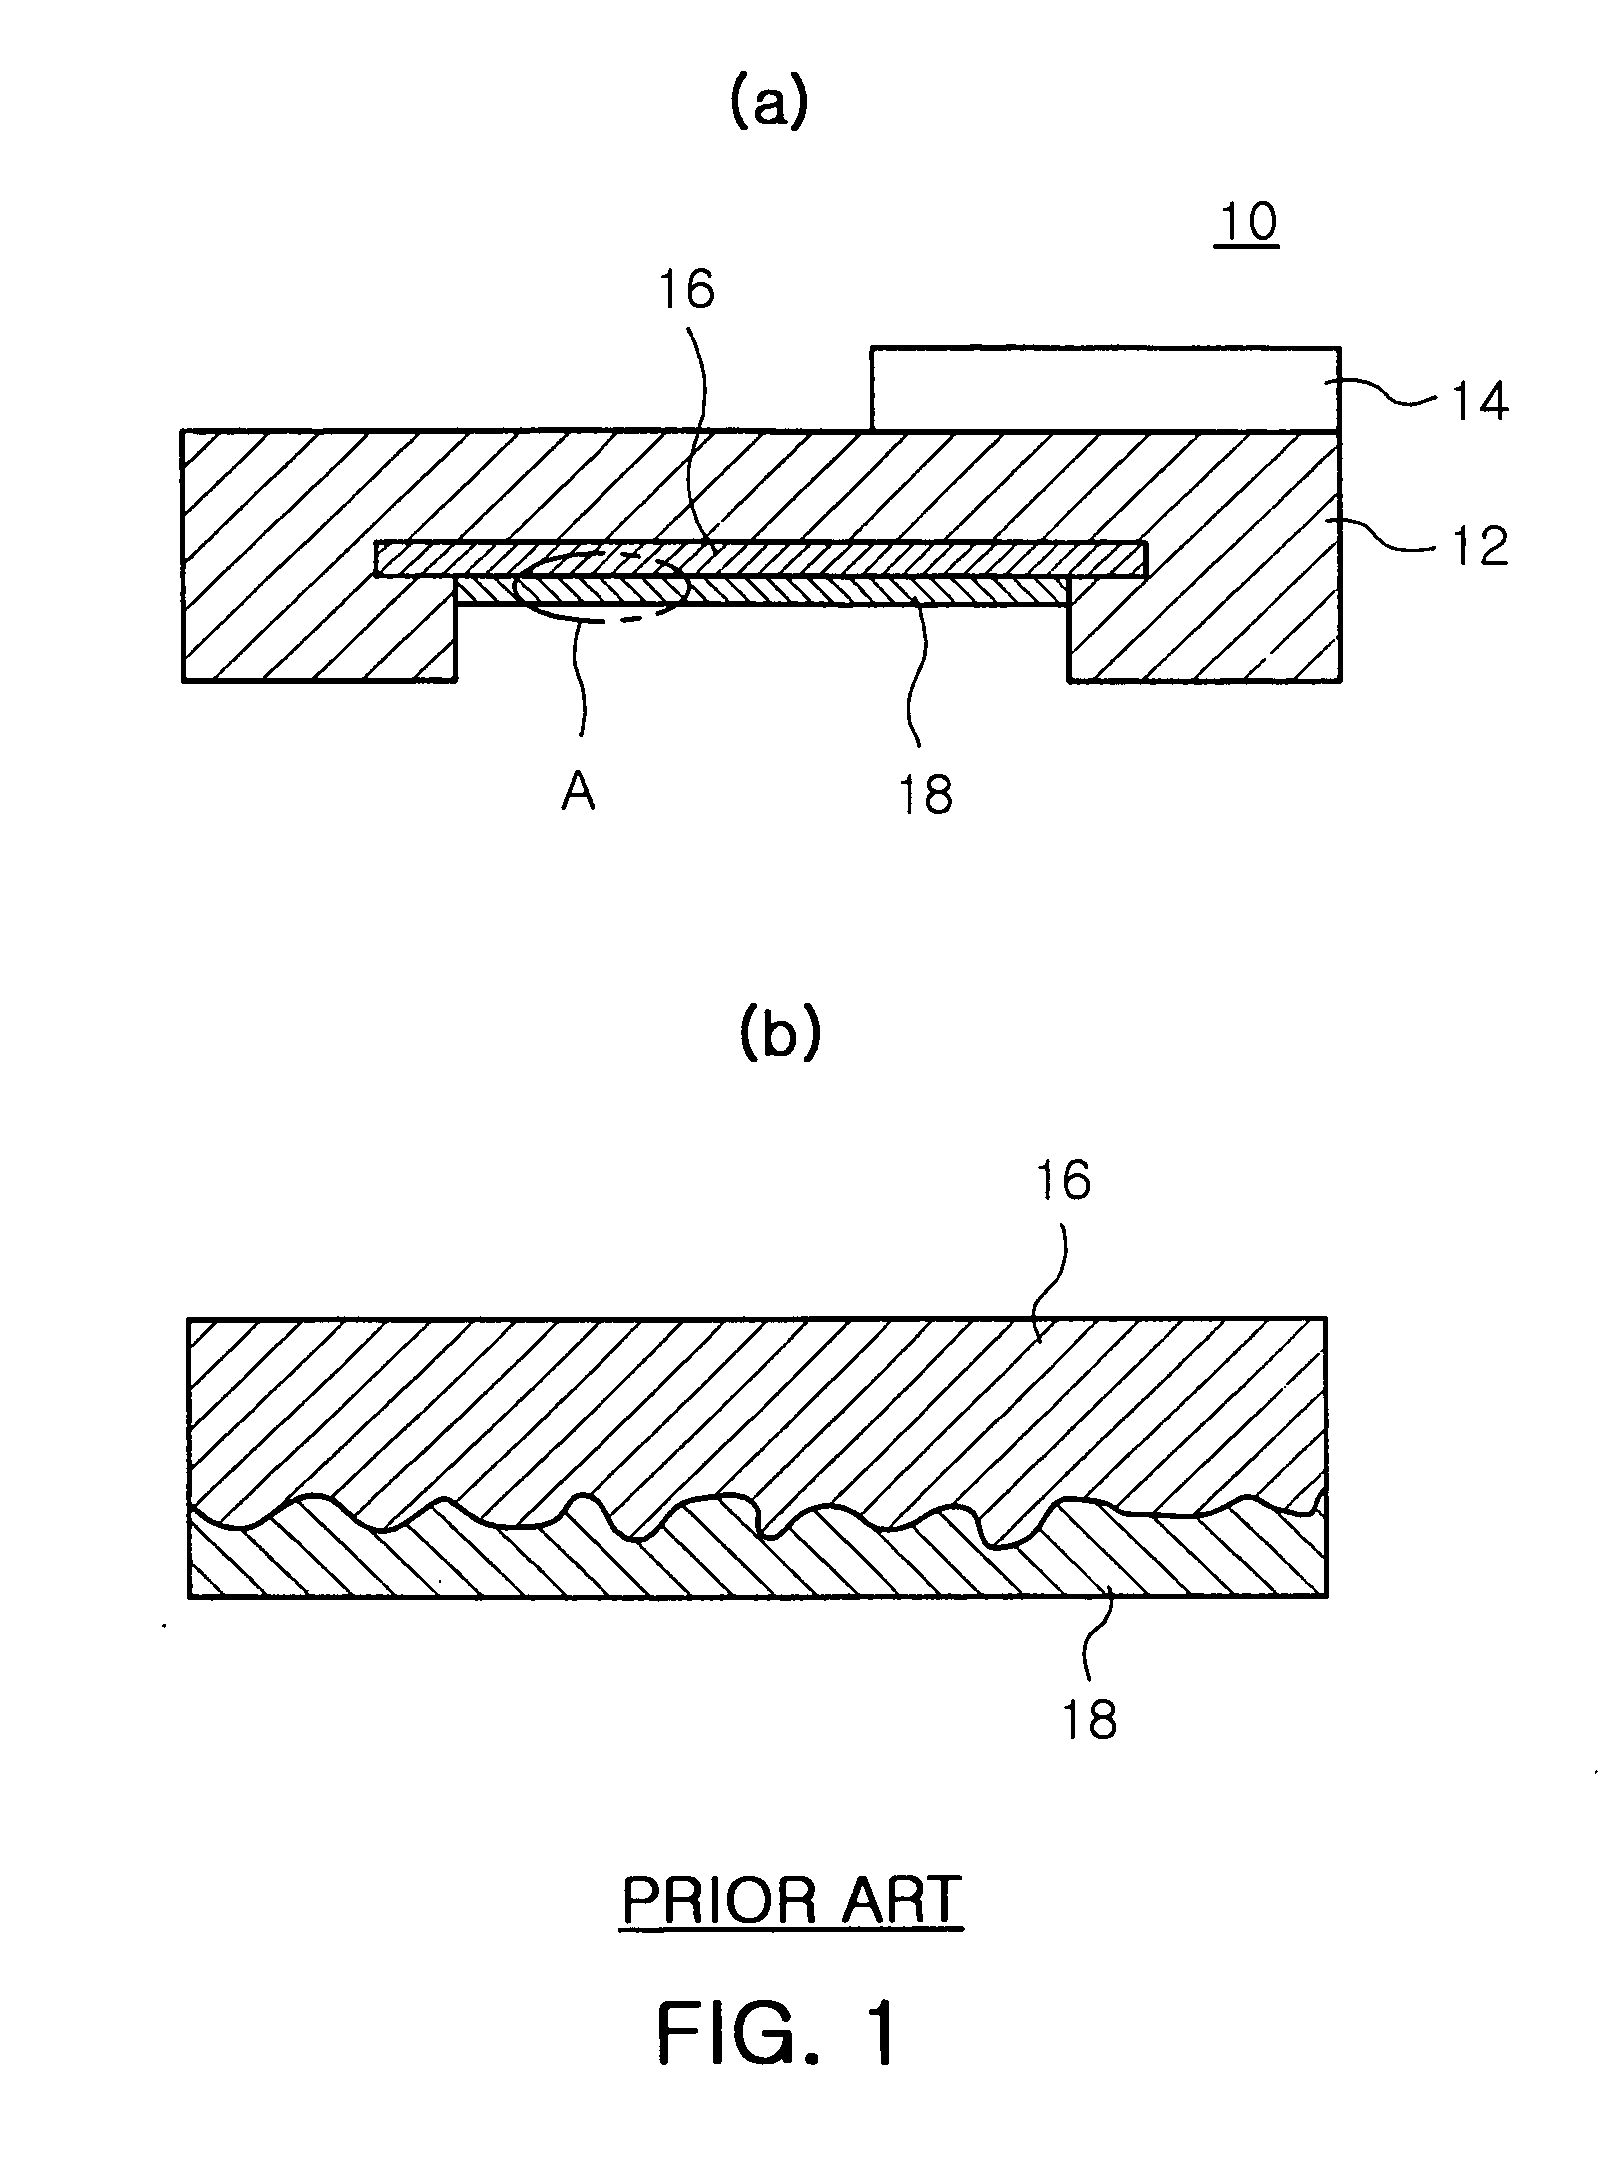 Thickness measuring method for organic coating film on metal surface